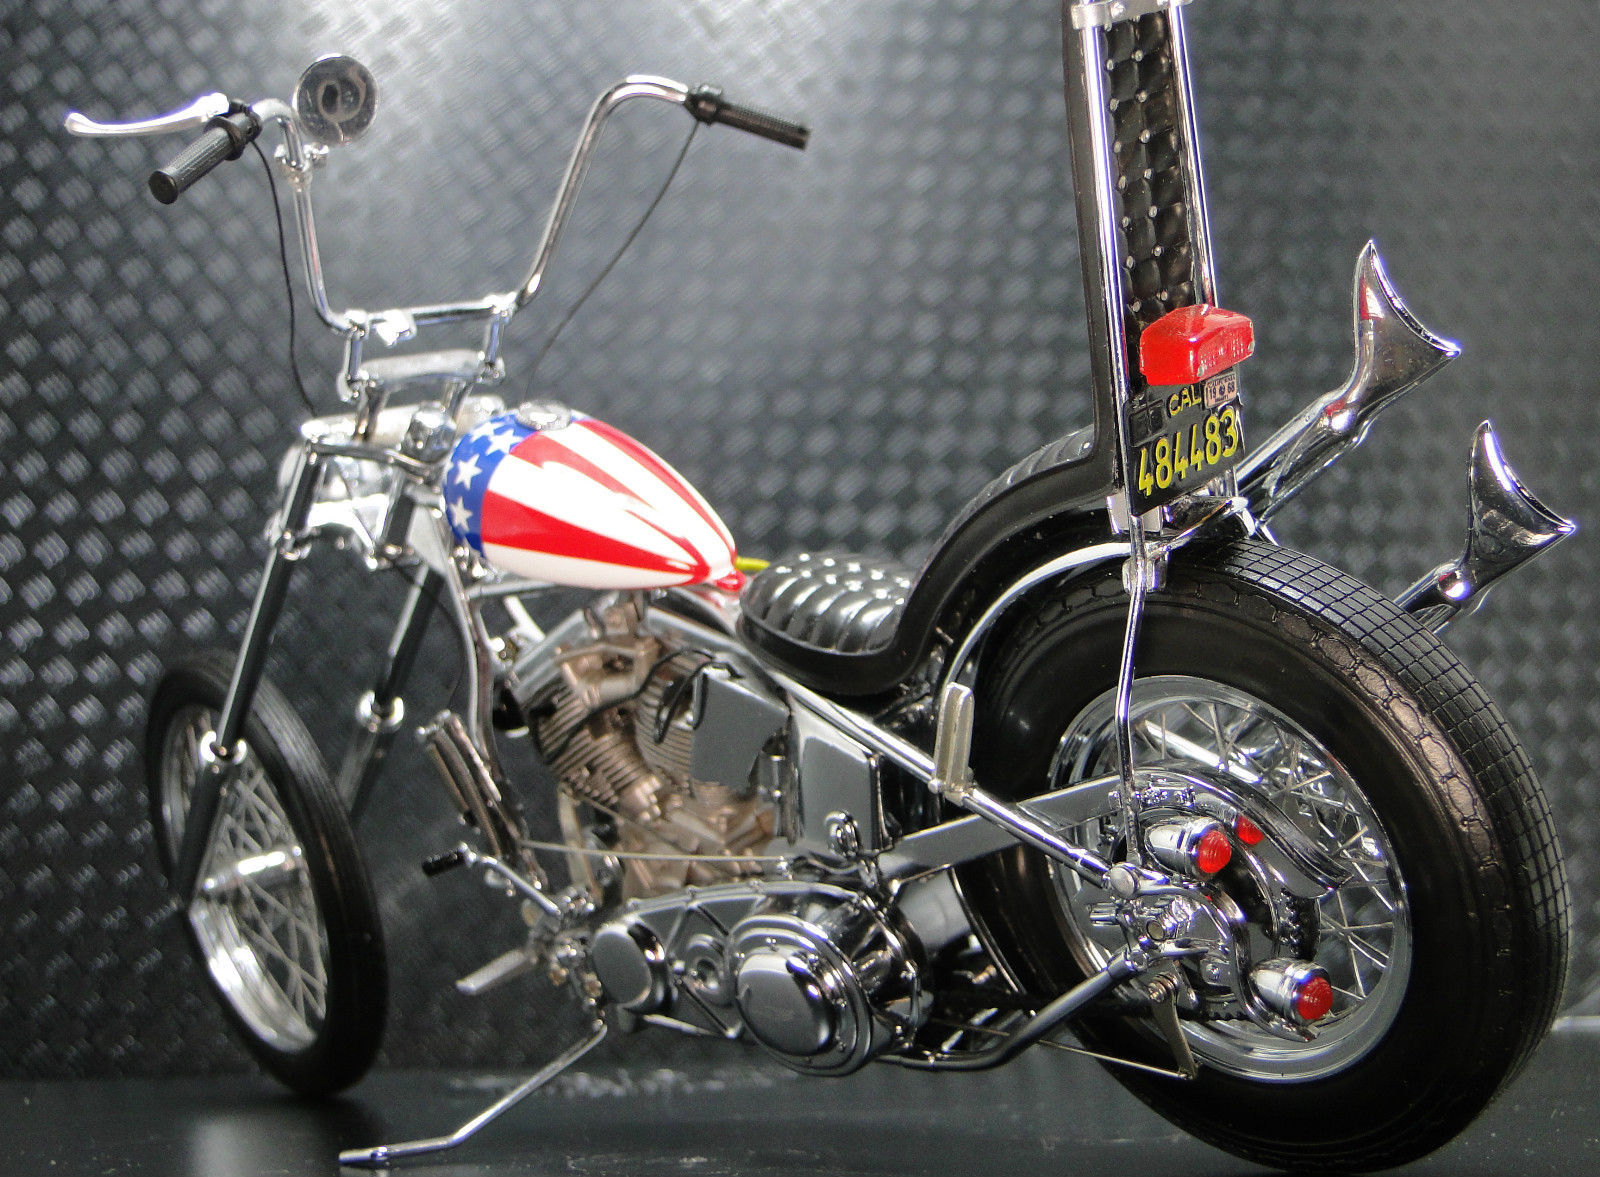 Harley Davidson Motorcycle 1969 Easy Rider Movie Captain America Chopper Model 1 Other